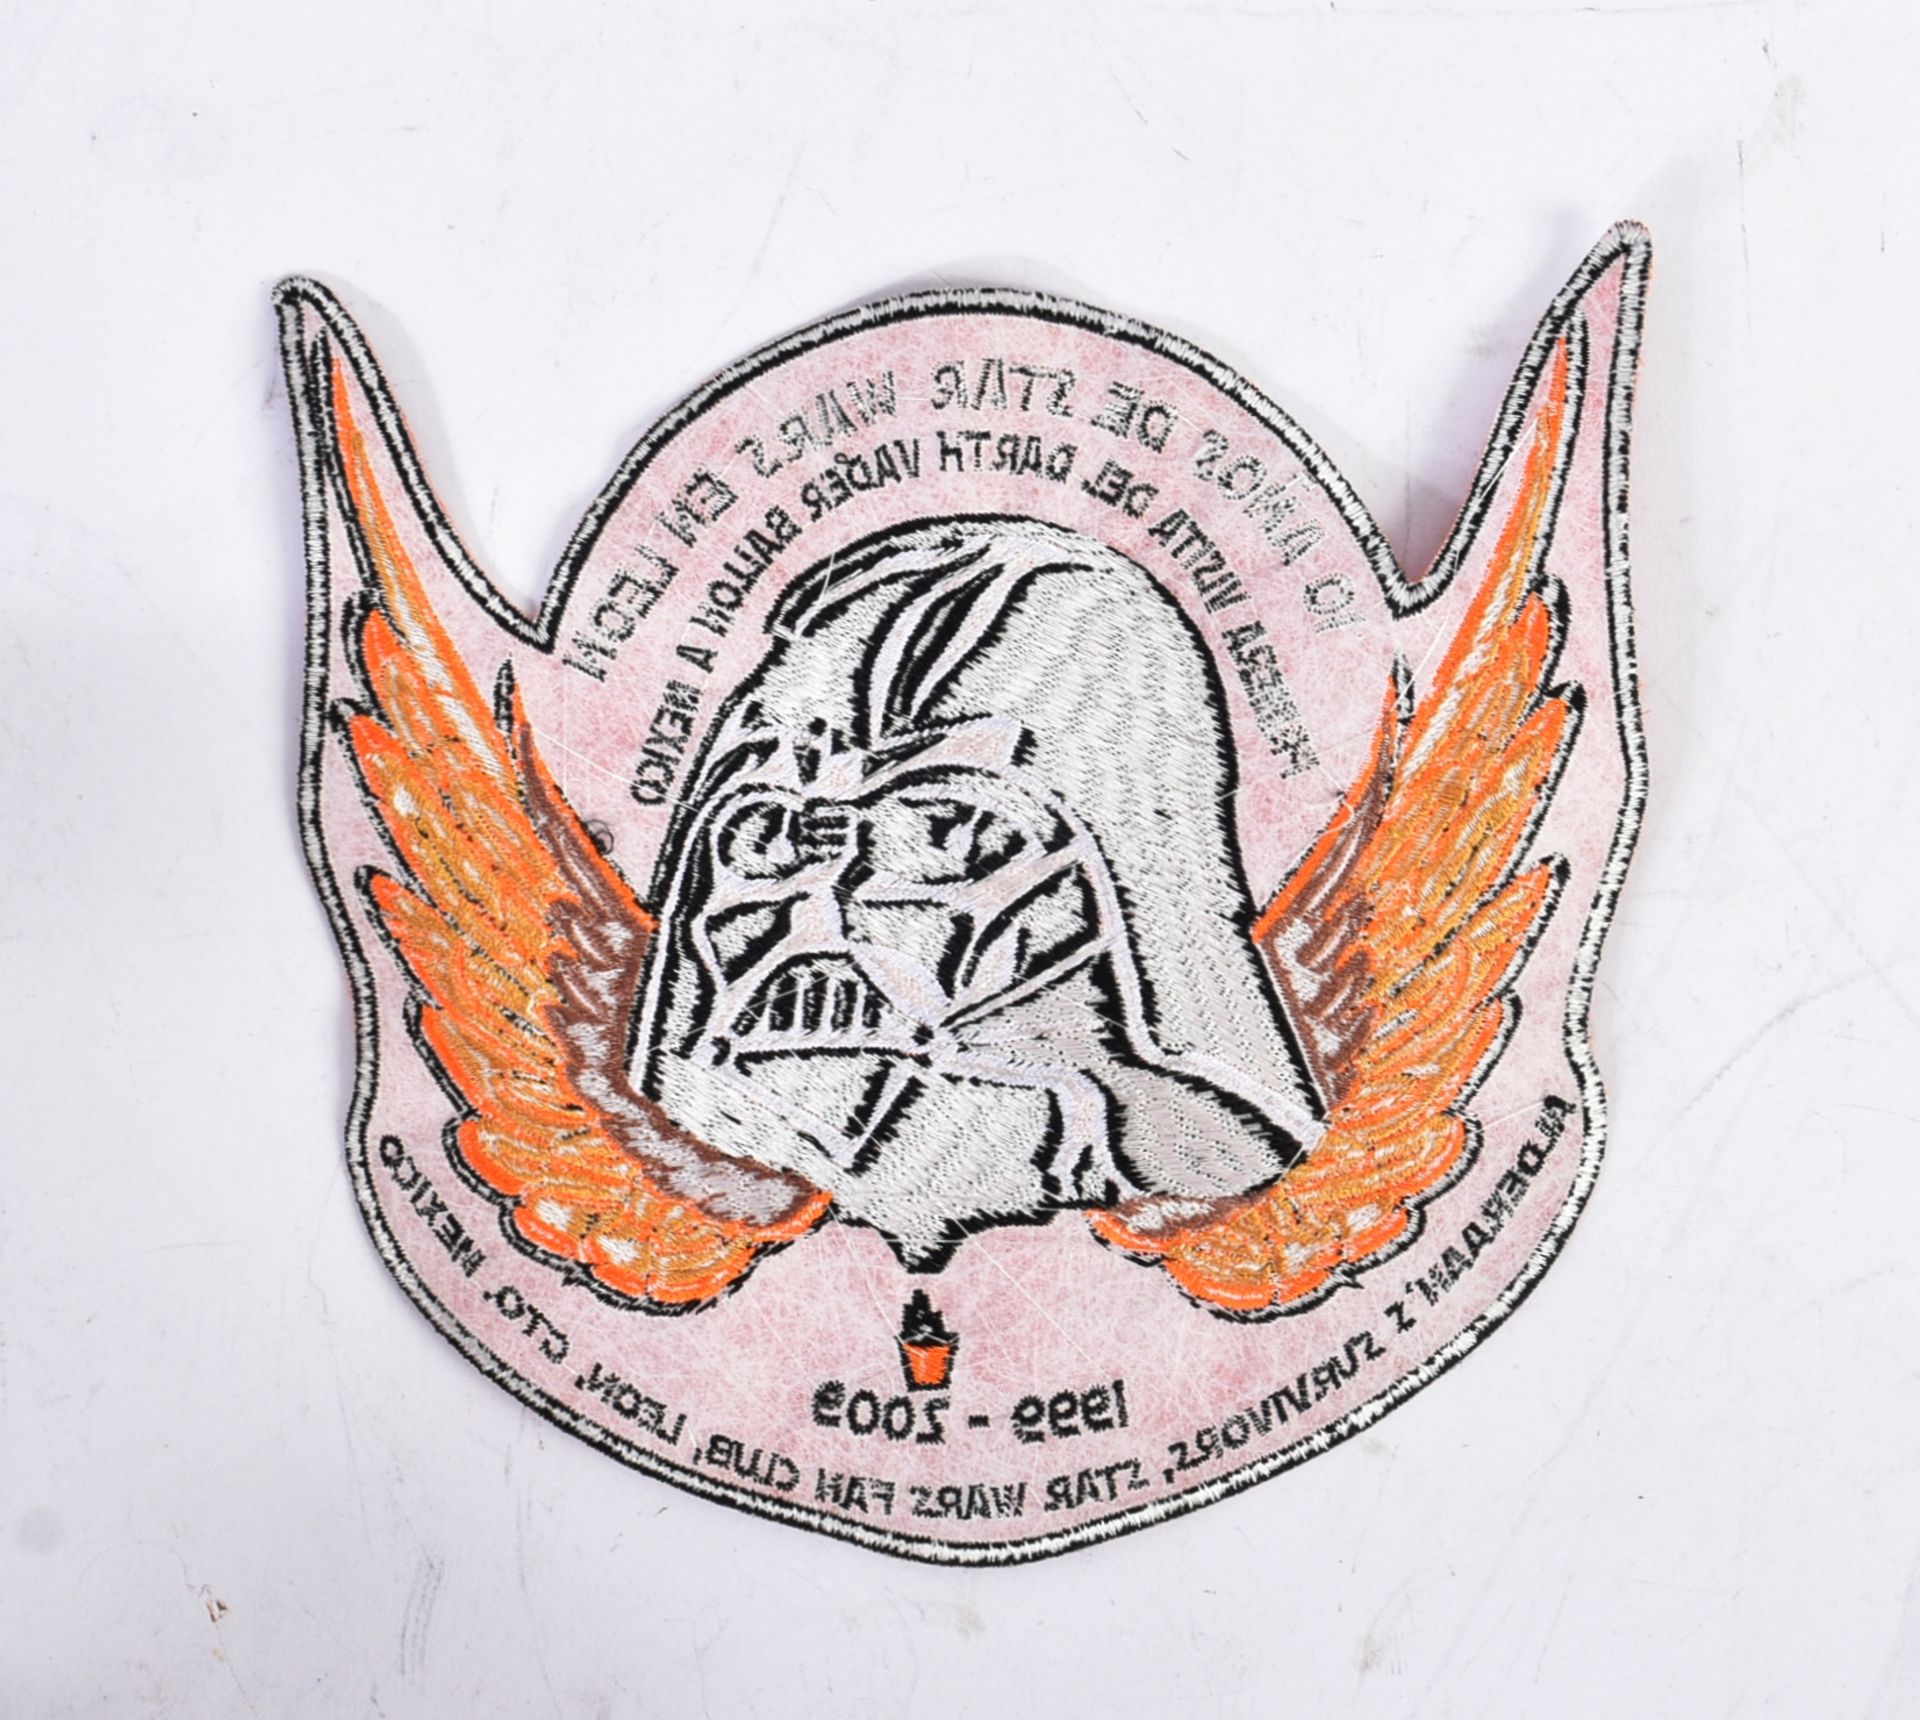 ESTATE OF JEREMY BULLOCH - STAR WARS - MEXICAN CLOTH PATCH - Image 3 of 3